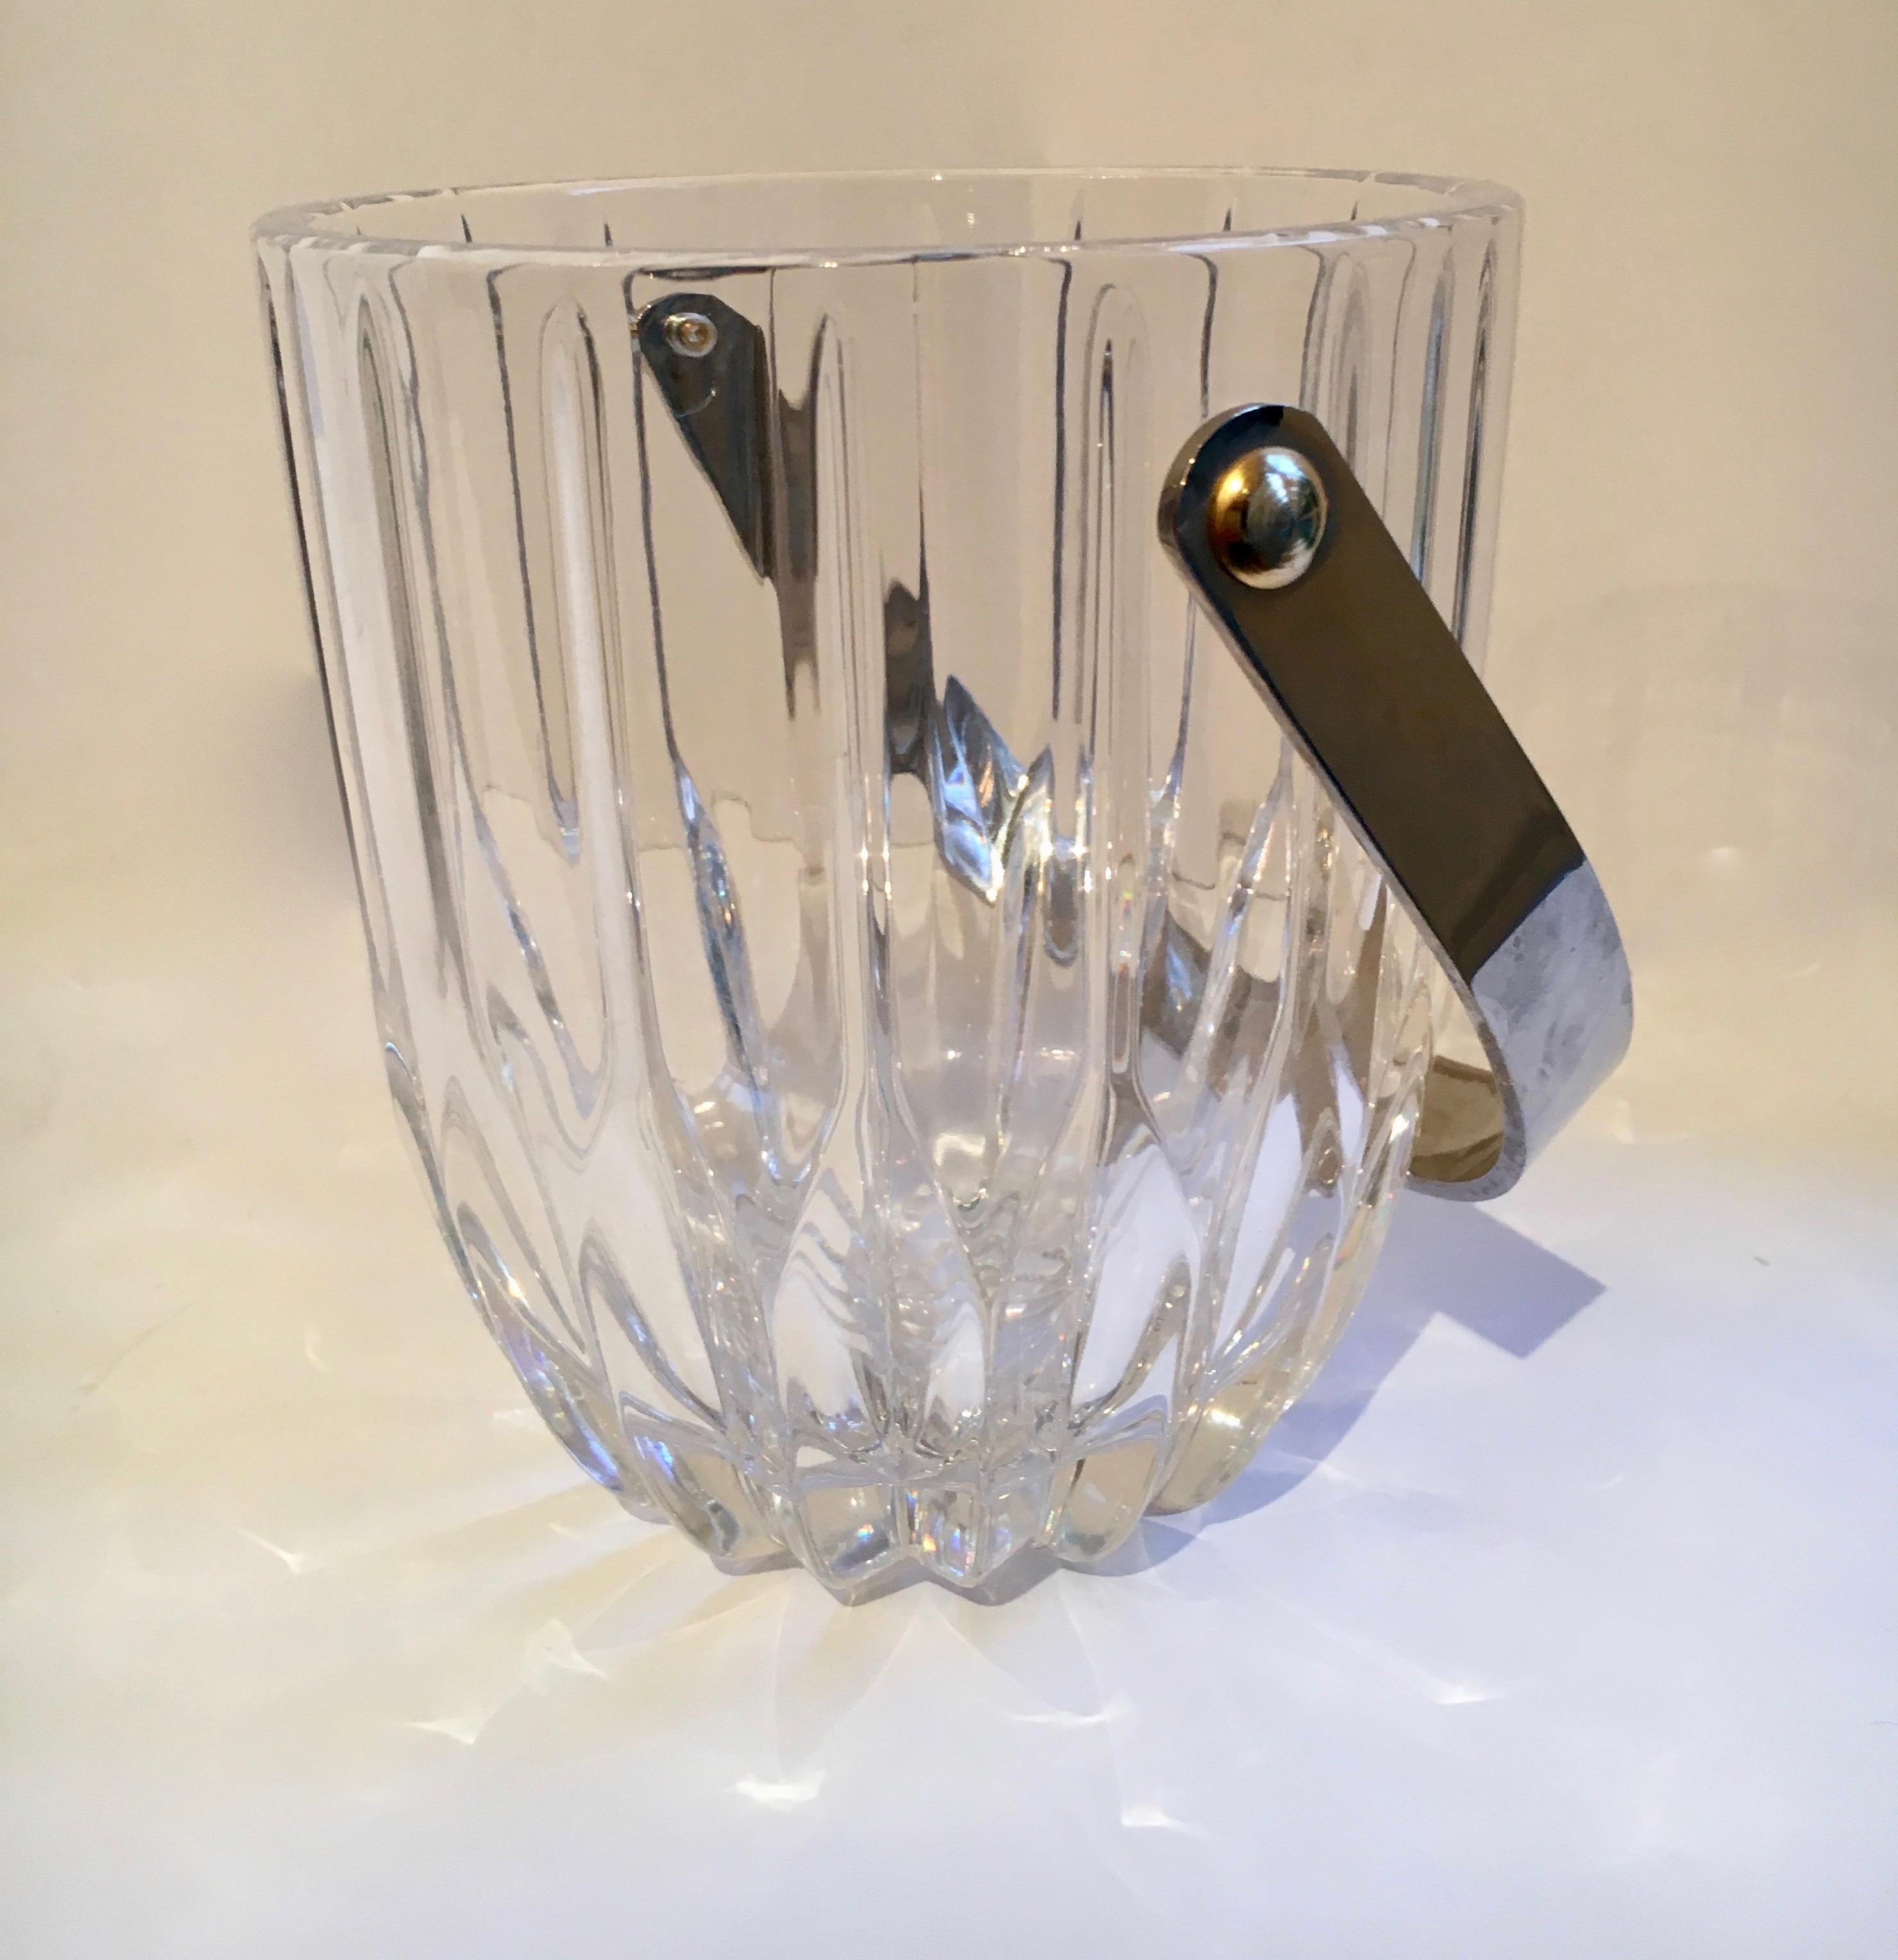 Crystal ice bucket with nickel handle - brass rivet detail on side. This is a very handsome and simple ice bucket ready for any bar, bedroom or office!

Elegant and on the smaller side - perfect for ice, but 'could' still rock a bottle of white or